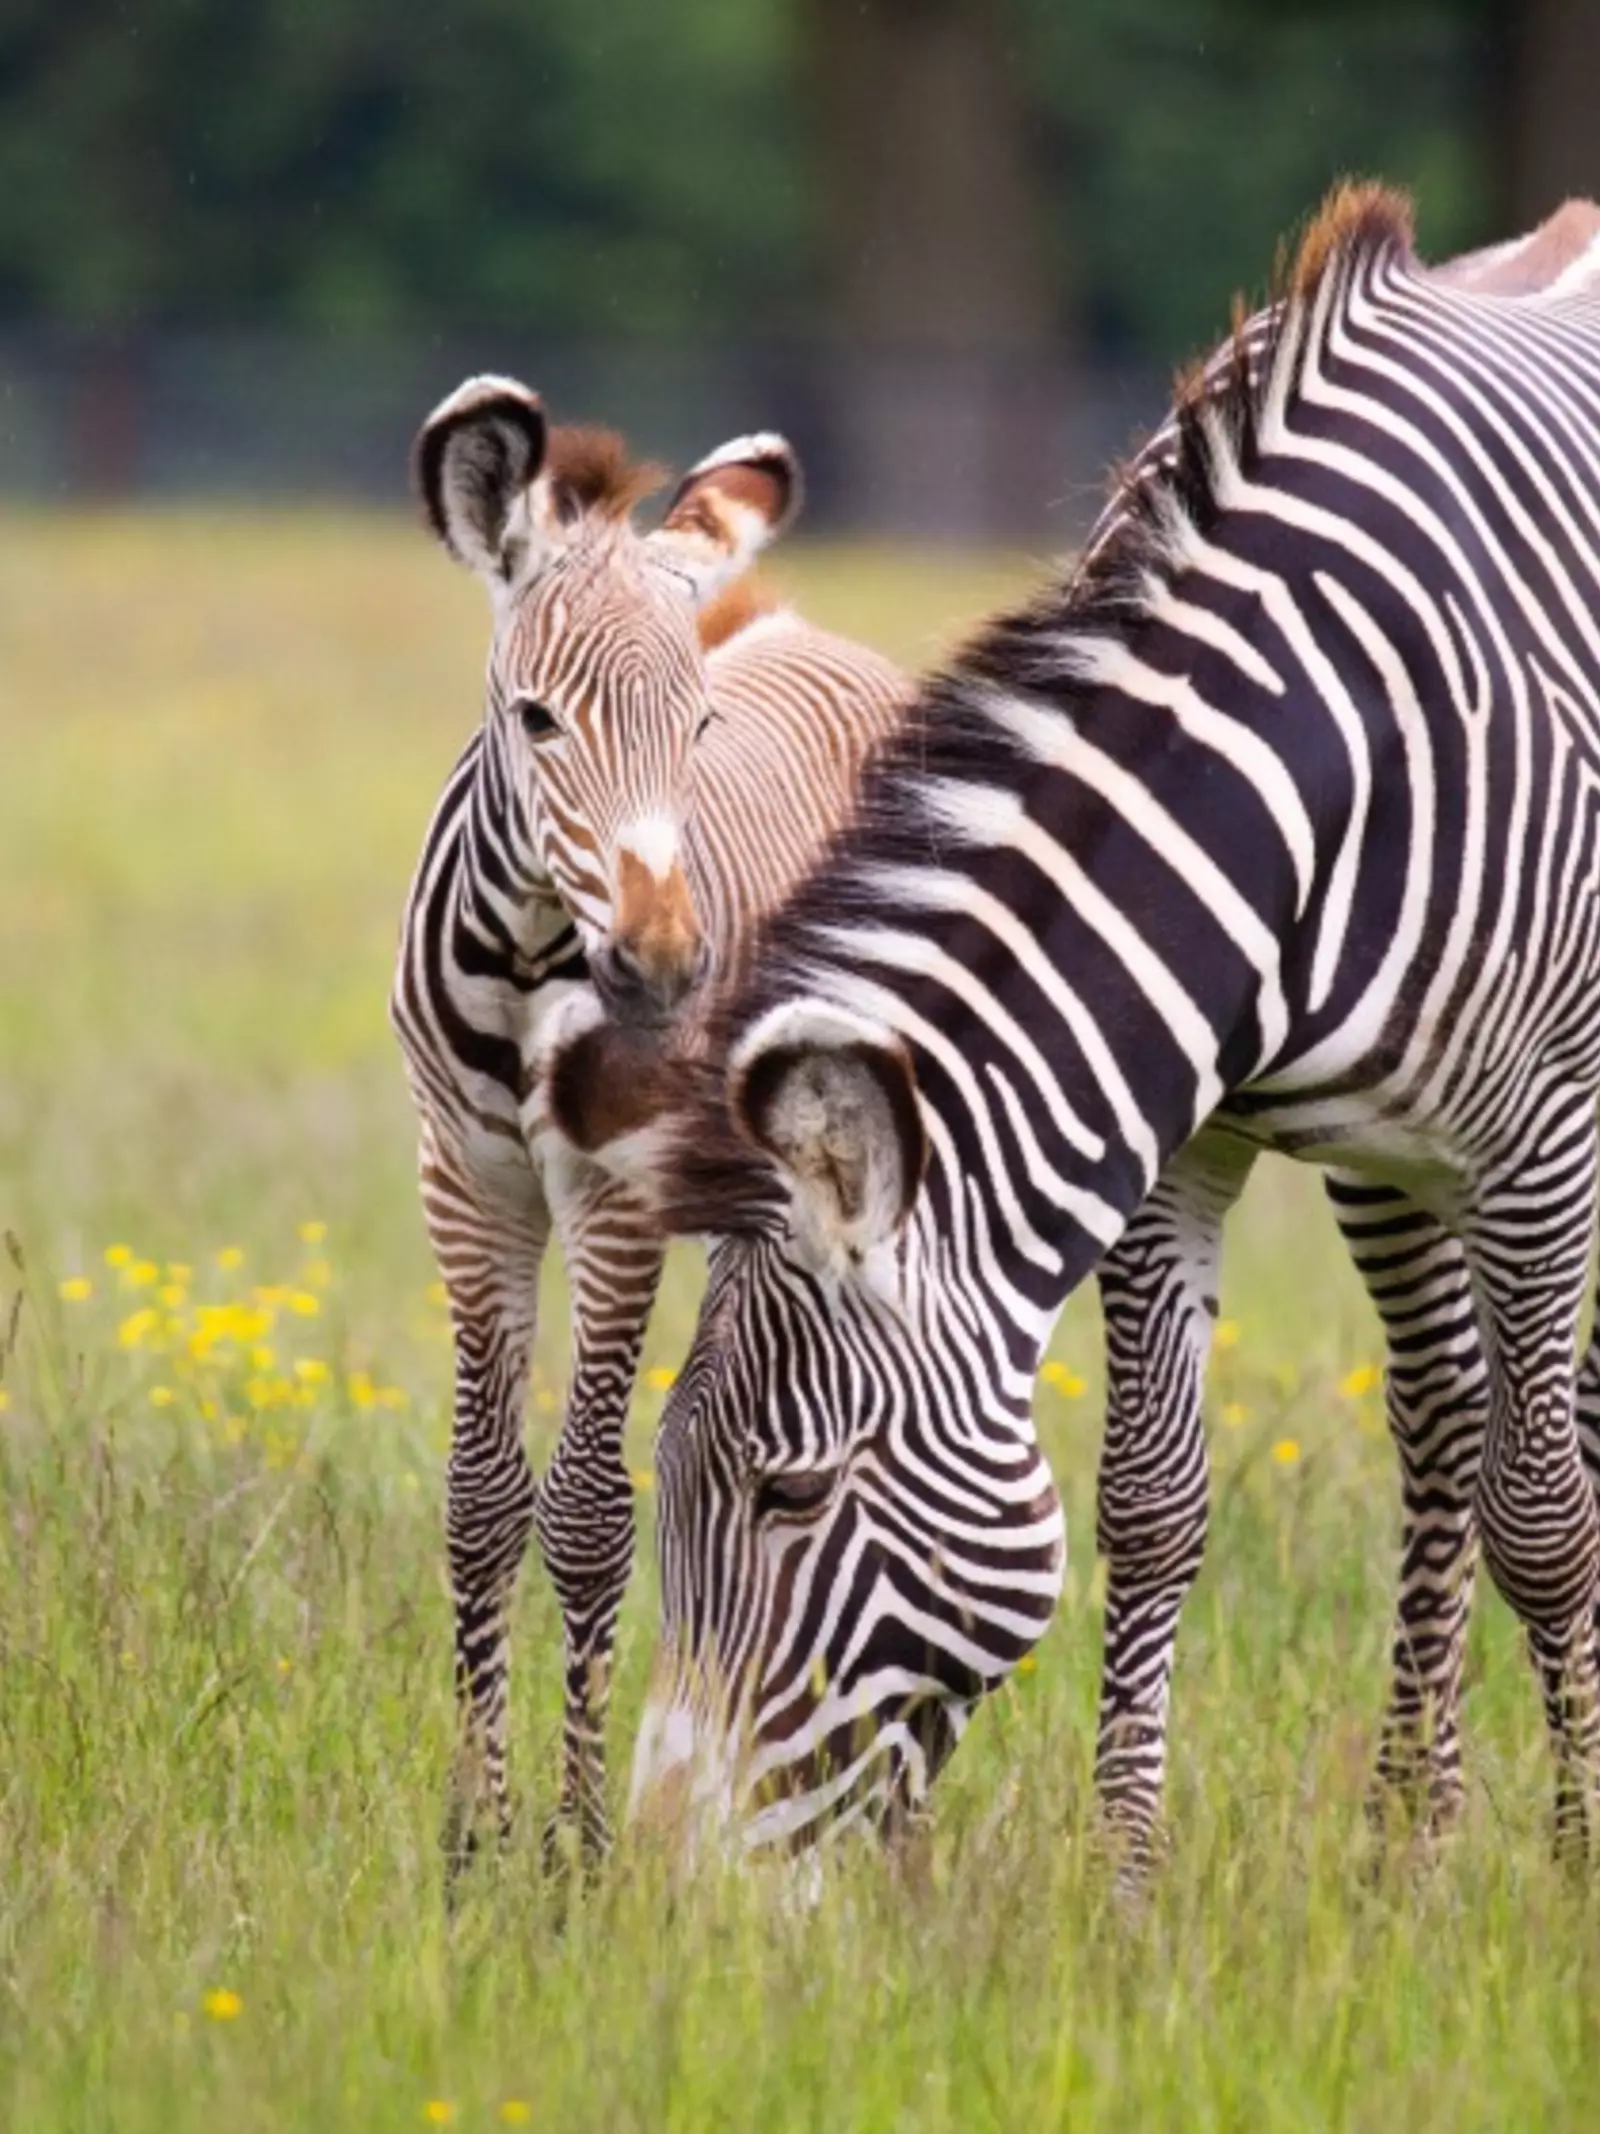 Grevy's Zebra foal with mum at Whipsnade Zoo field